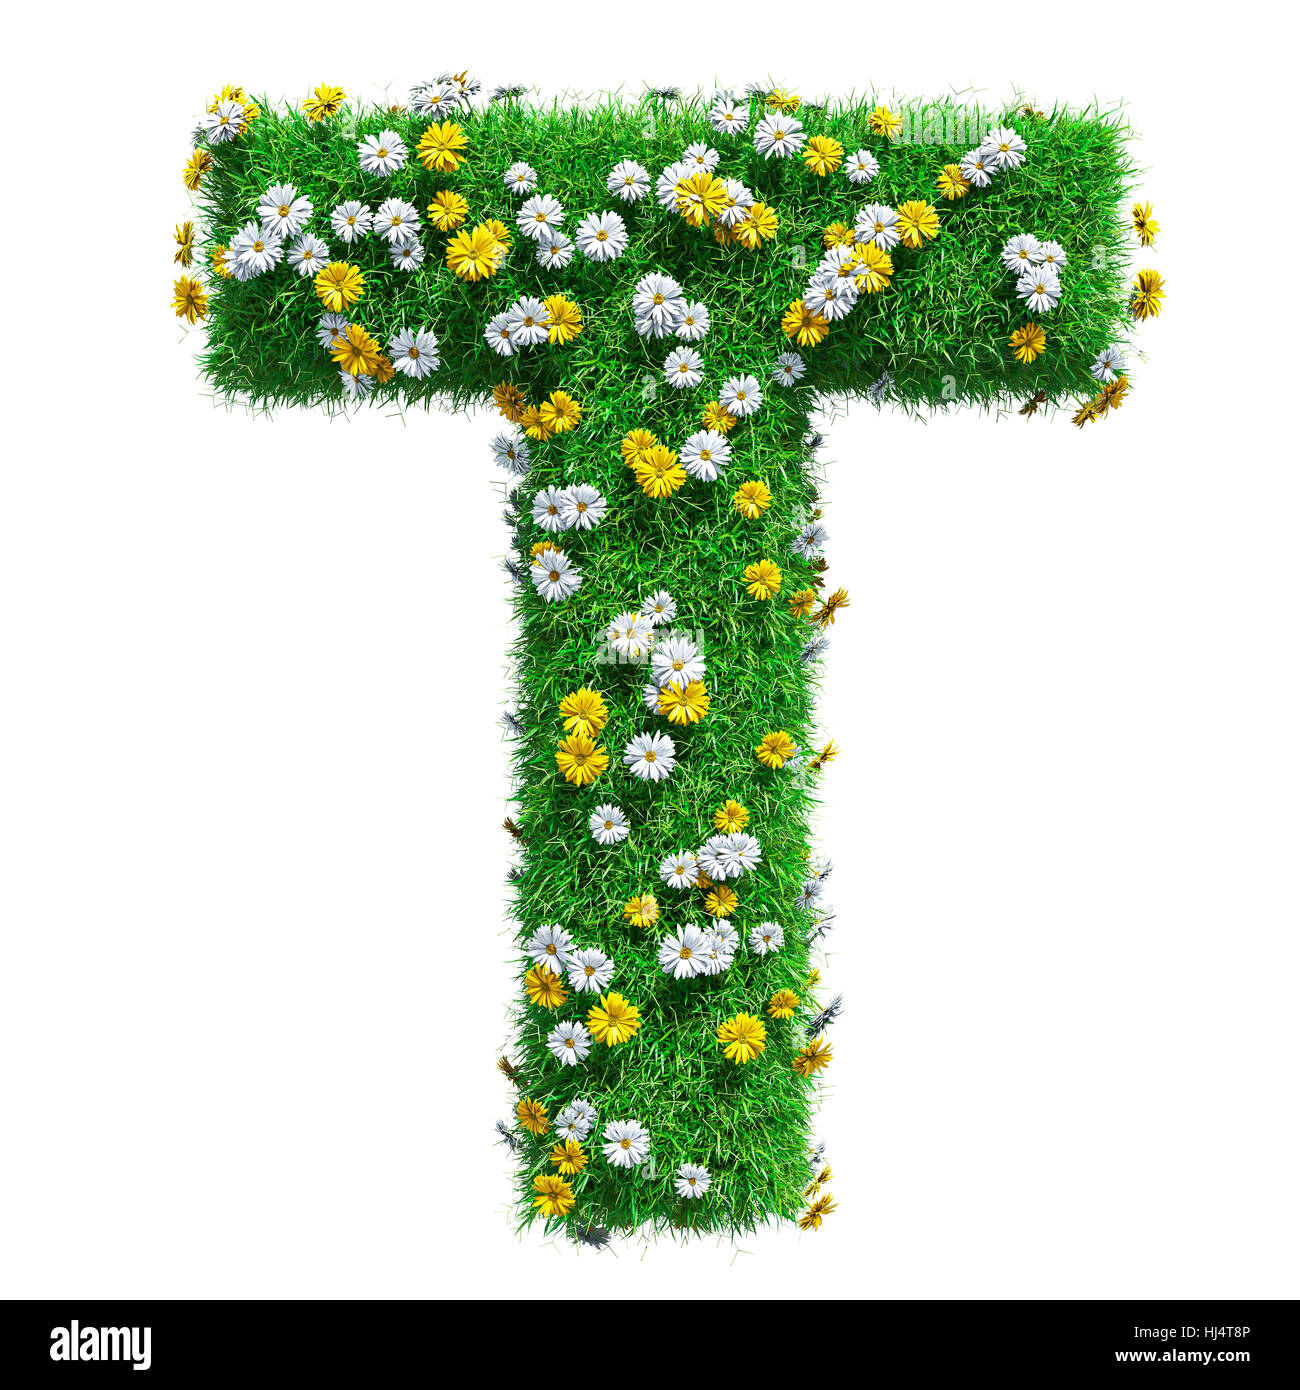 Letter T Of Green Grass And Flowers. Isolated On White Background ...